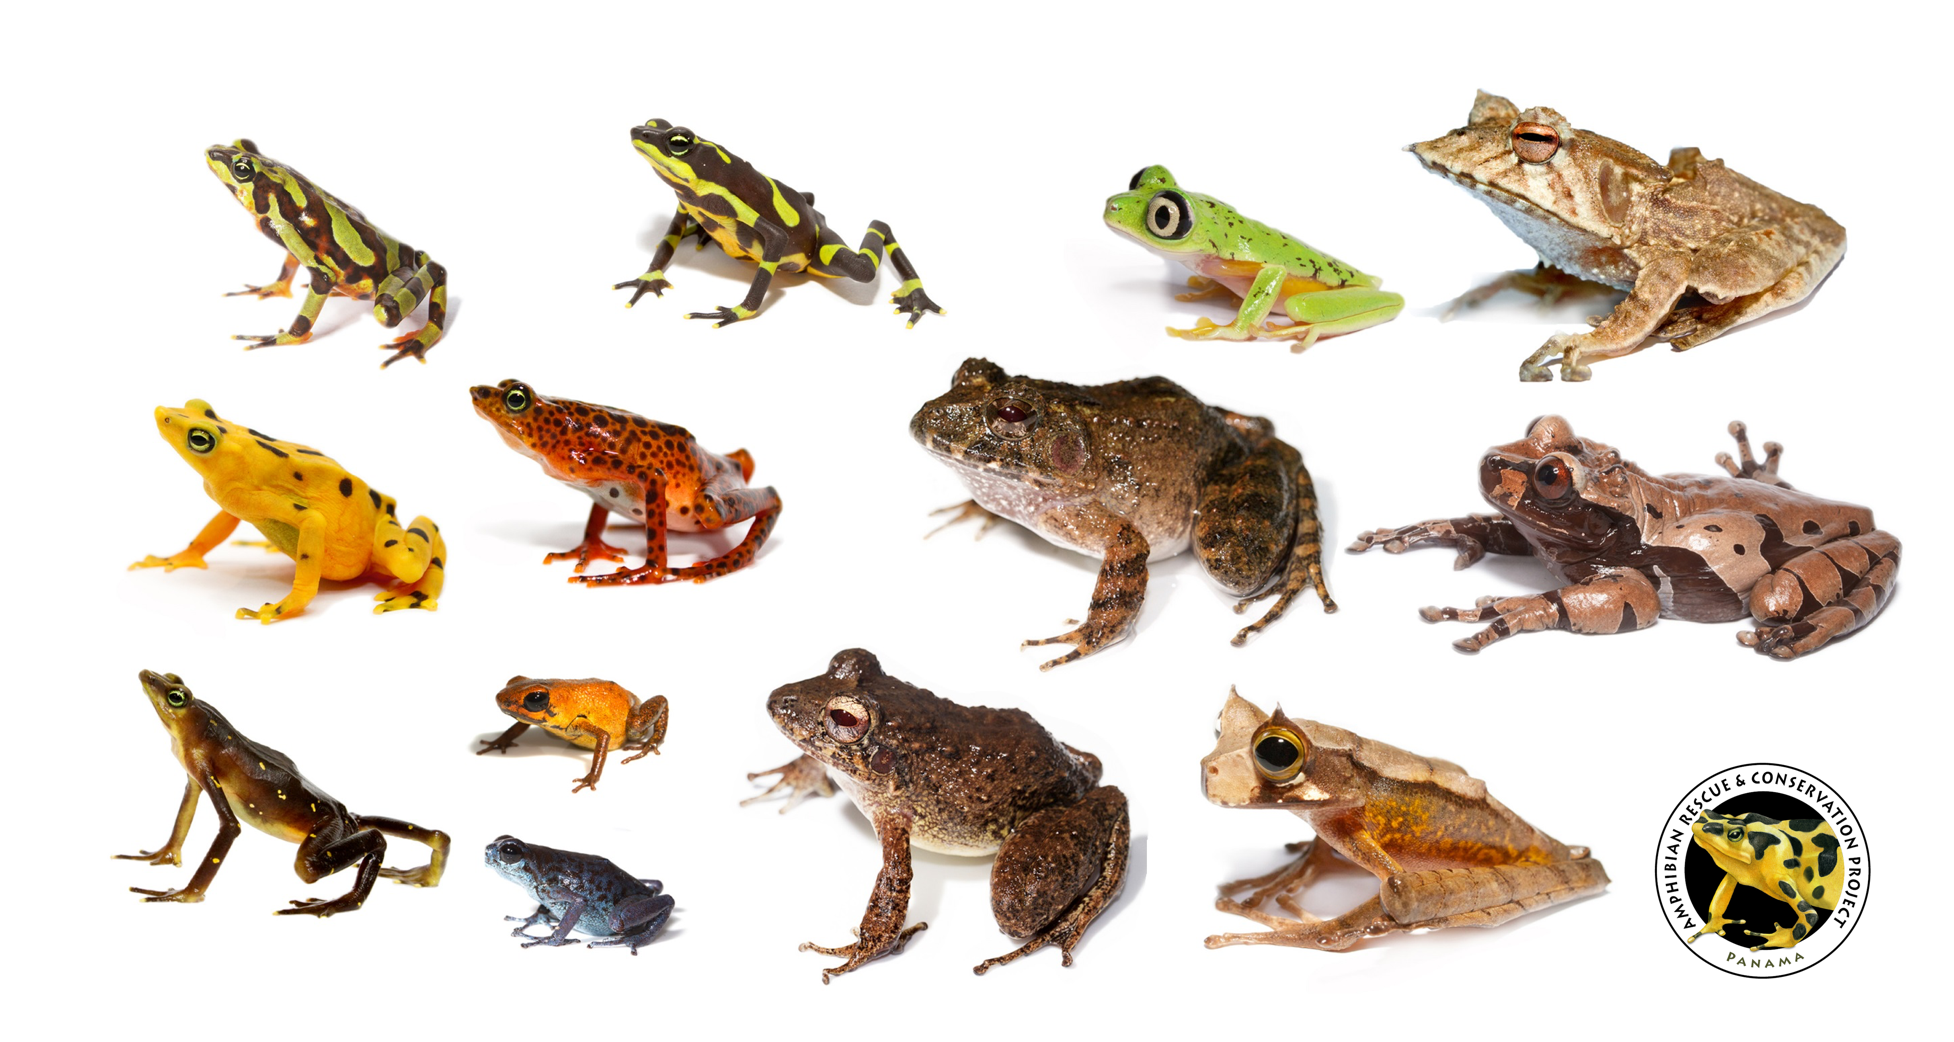 About | Amphibian Rescue and Conservation Project